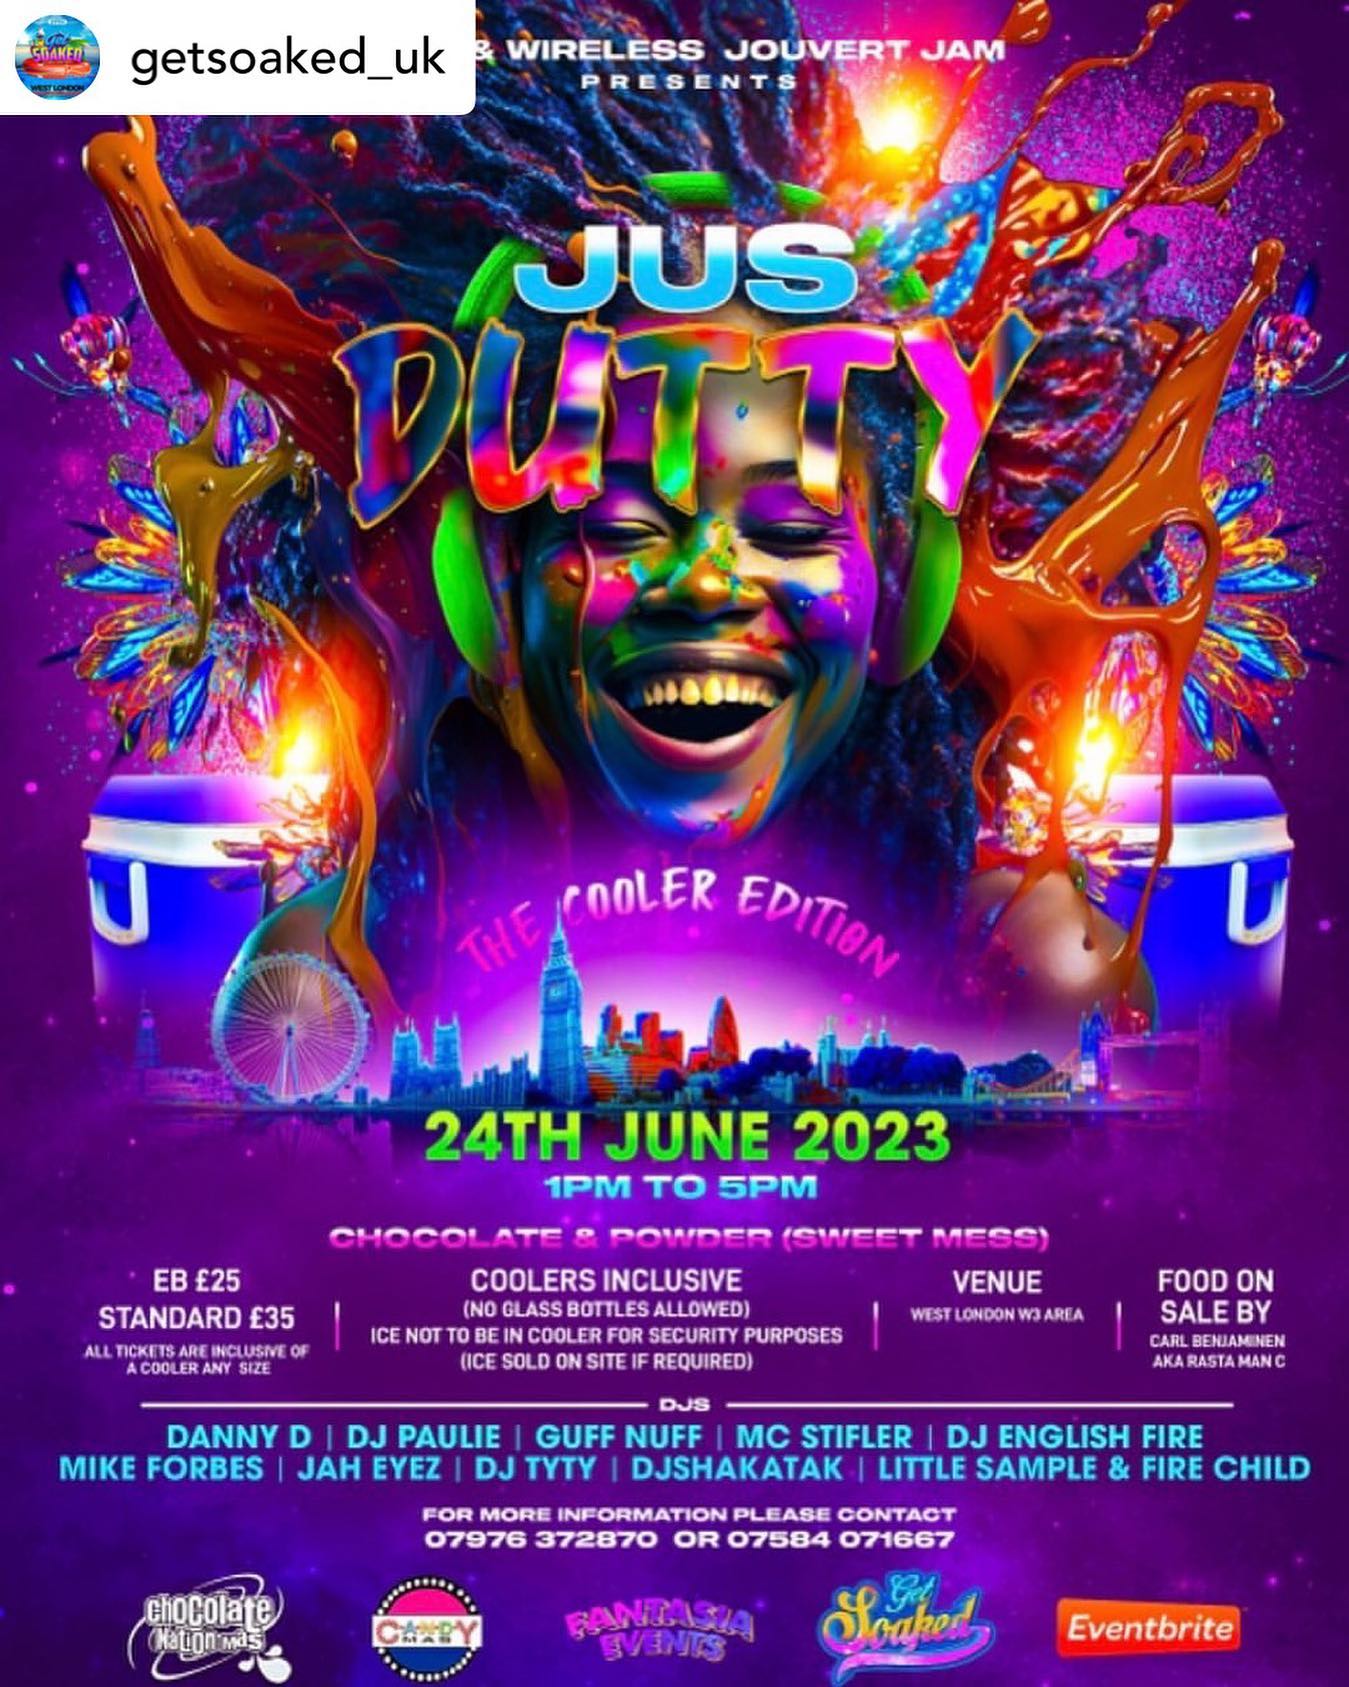 We Out And Bad!!!!!

Wild & Wireless
  Silent Jouvert Jam.

  Presents
  Jus Dutty

The Cooler Edition 

Headphones 
Chocolate 
Powder included on entry 🟰(Sweet Mess) 

 🗓24th June, 2023

1pm to 5pm

🎟EB £25
🎟Standard £35
All ticket allow entry with a cooler of any size

https://jusdutty_cooler.eventbrite.co.uk

Coolers 
🍾(No Glass Bottles allowed)
🧊ICE not to be in cooler for Security Purposes
(Ice Sold On Site if required)

DJs
Danny D
Dj Paulie
Guff Nuff
Mc Stifler
Dj English Fire
Mike Forbes
Jah Eyez
DJ TyTy 
DJShakatak 
Little Sample & Fire Child

Food On Sale by 
Chef C. Benjamin 
AKA Rasta Man C 

Sponsored By……

Chocolate Nation 
 &
 Candy Mas

Venue
  In
West London W3 Area

For More Information Please contact 
07976 372870  or 07584 071667